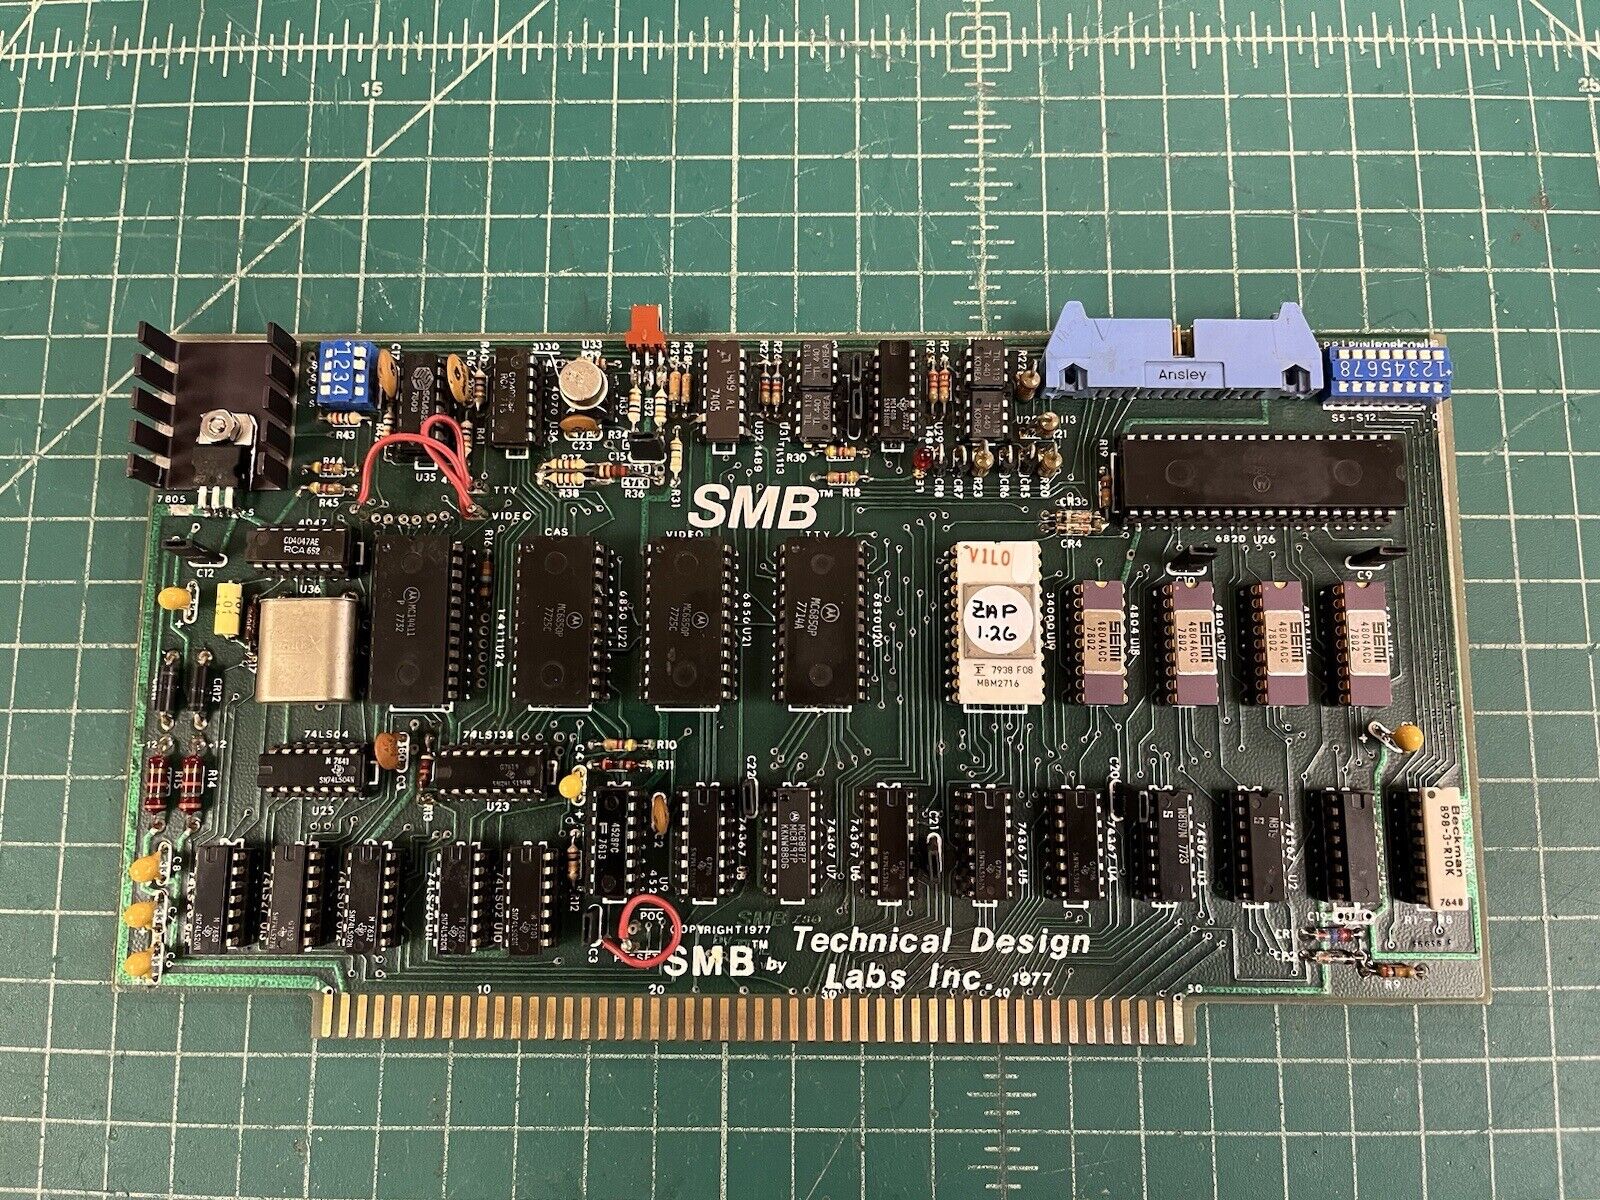 Technical Design Labs System Monitor Board TDL SMB S-100 Altair IMSAI EPROM Mod